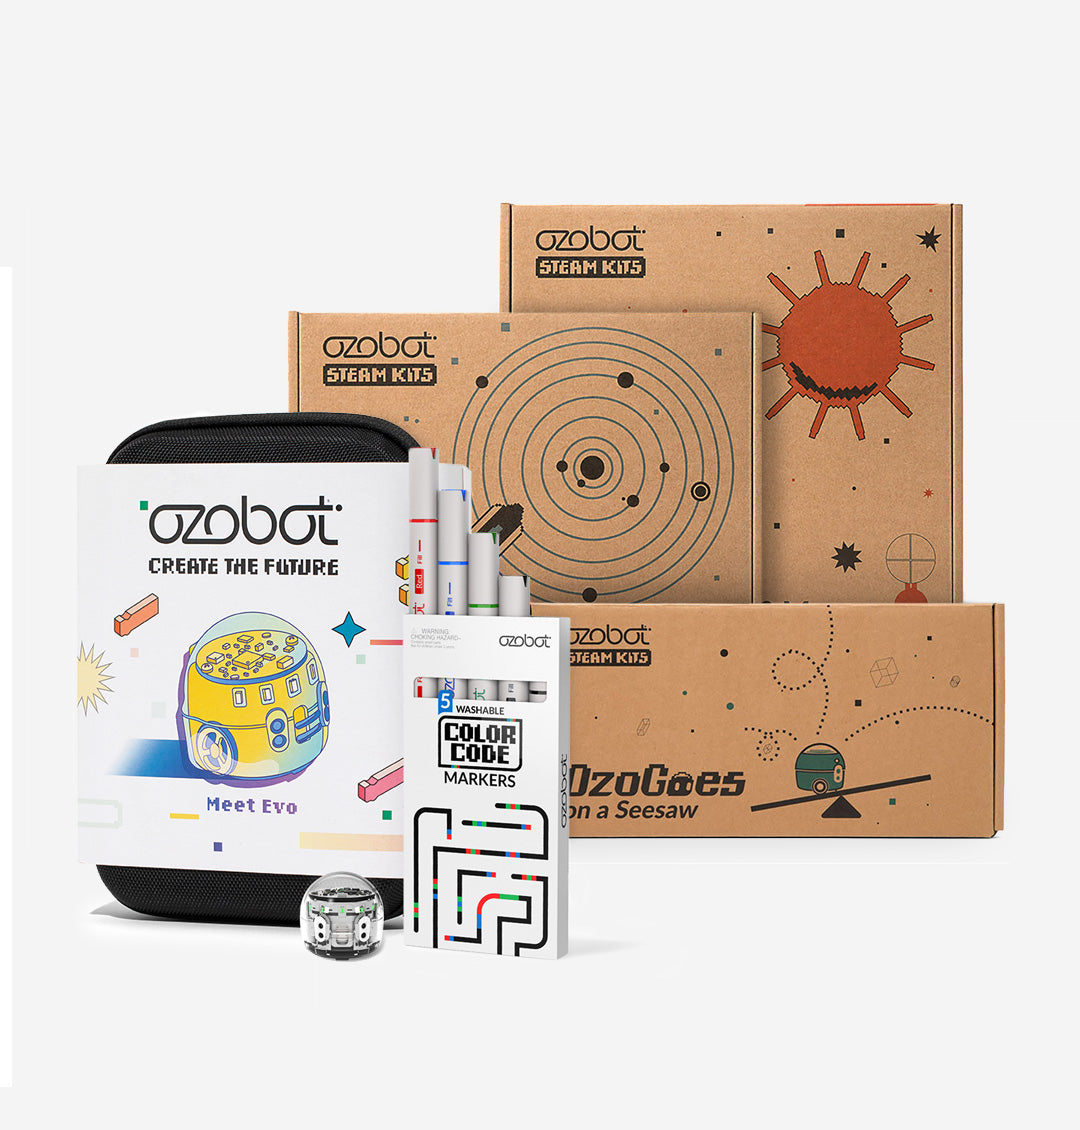 STEM Bundle Evo Entry Kit and STEAM Kits by Ozobot for coding education